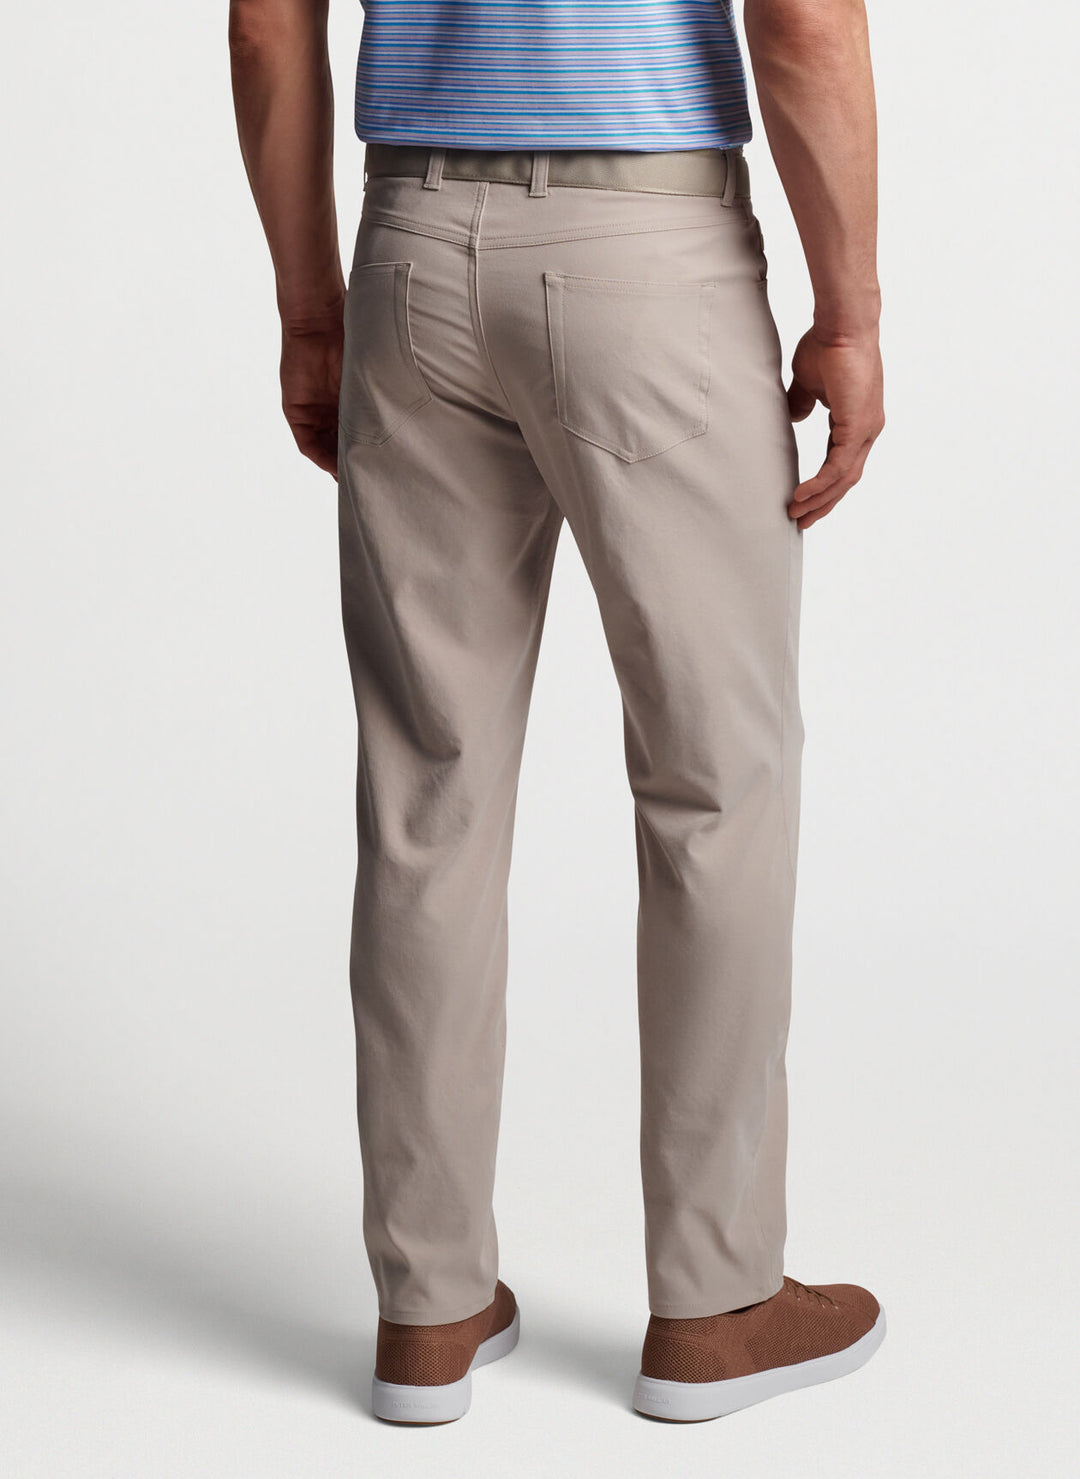 EB66 Performance Five-Pocket Pant in Navy by Peter Millar